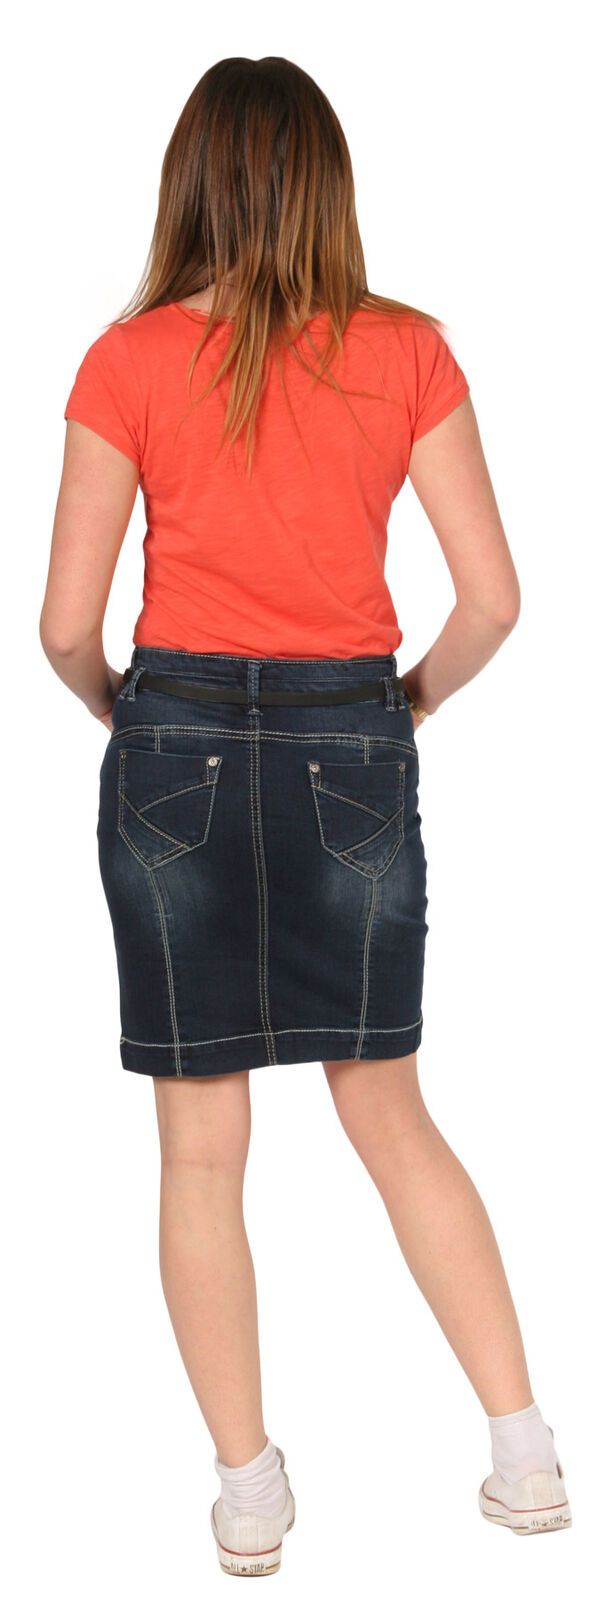 Full length back view of soft, medium weight, slightly stretchy denim skirt with view of rear pockets.